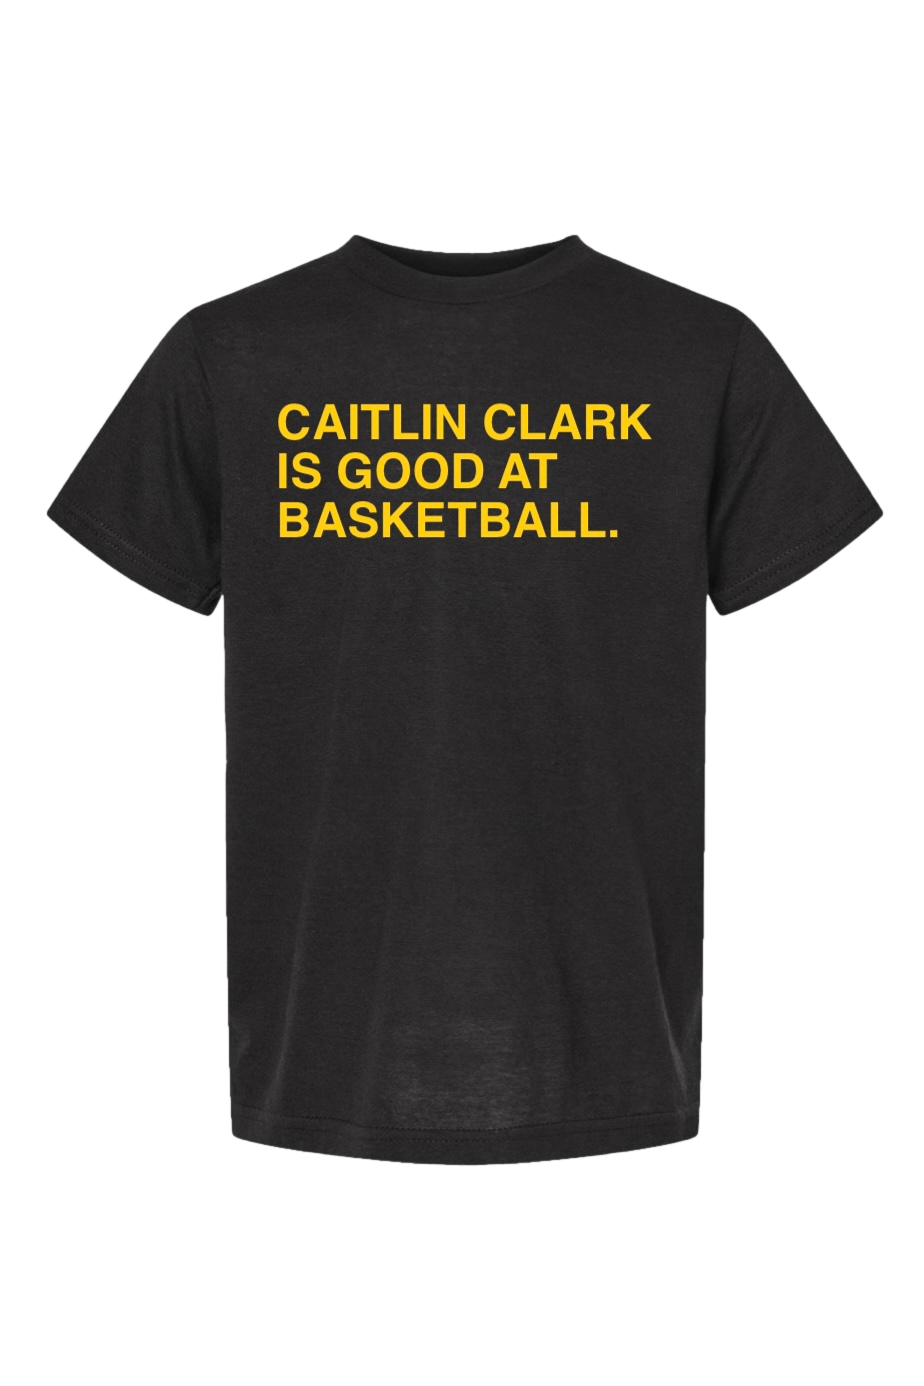 CAITLIN CLARK IS GOOD AT BASKETBALL. (YOUTH) - OBVIOUS SHIRTS